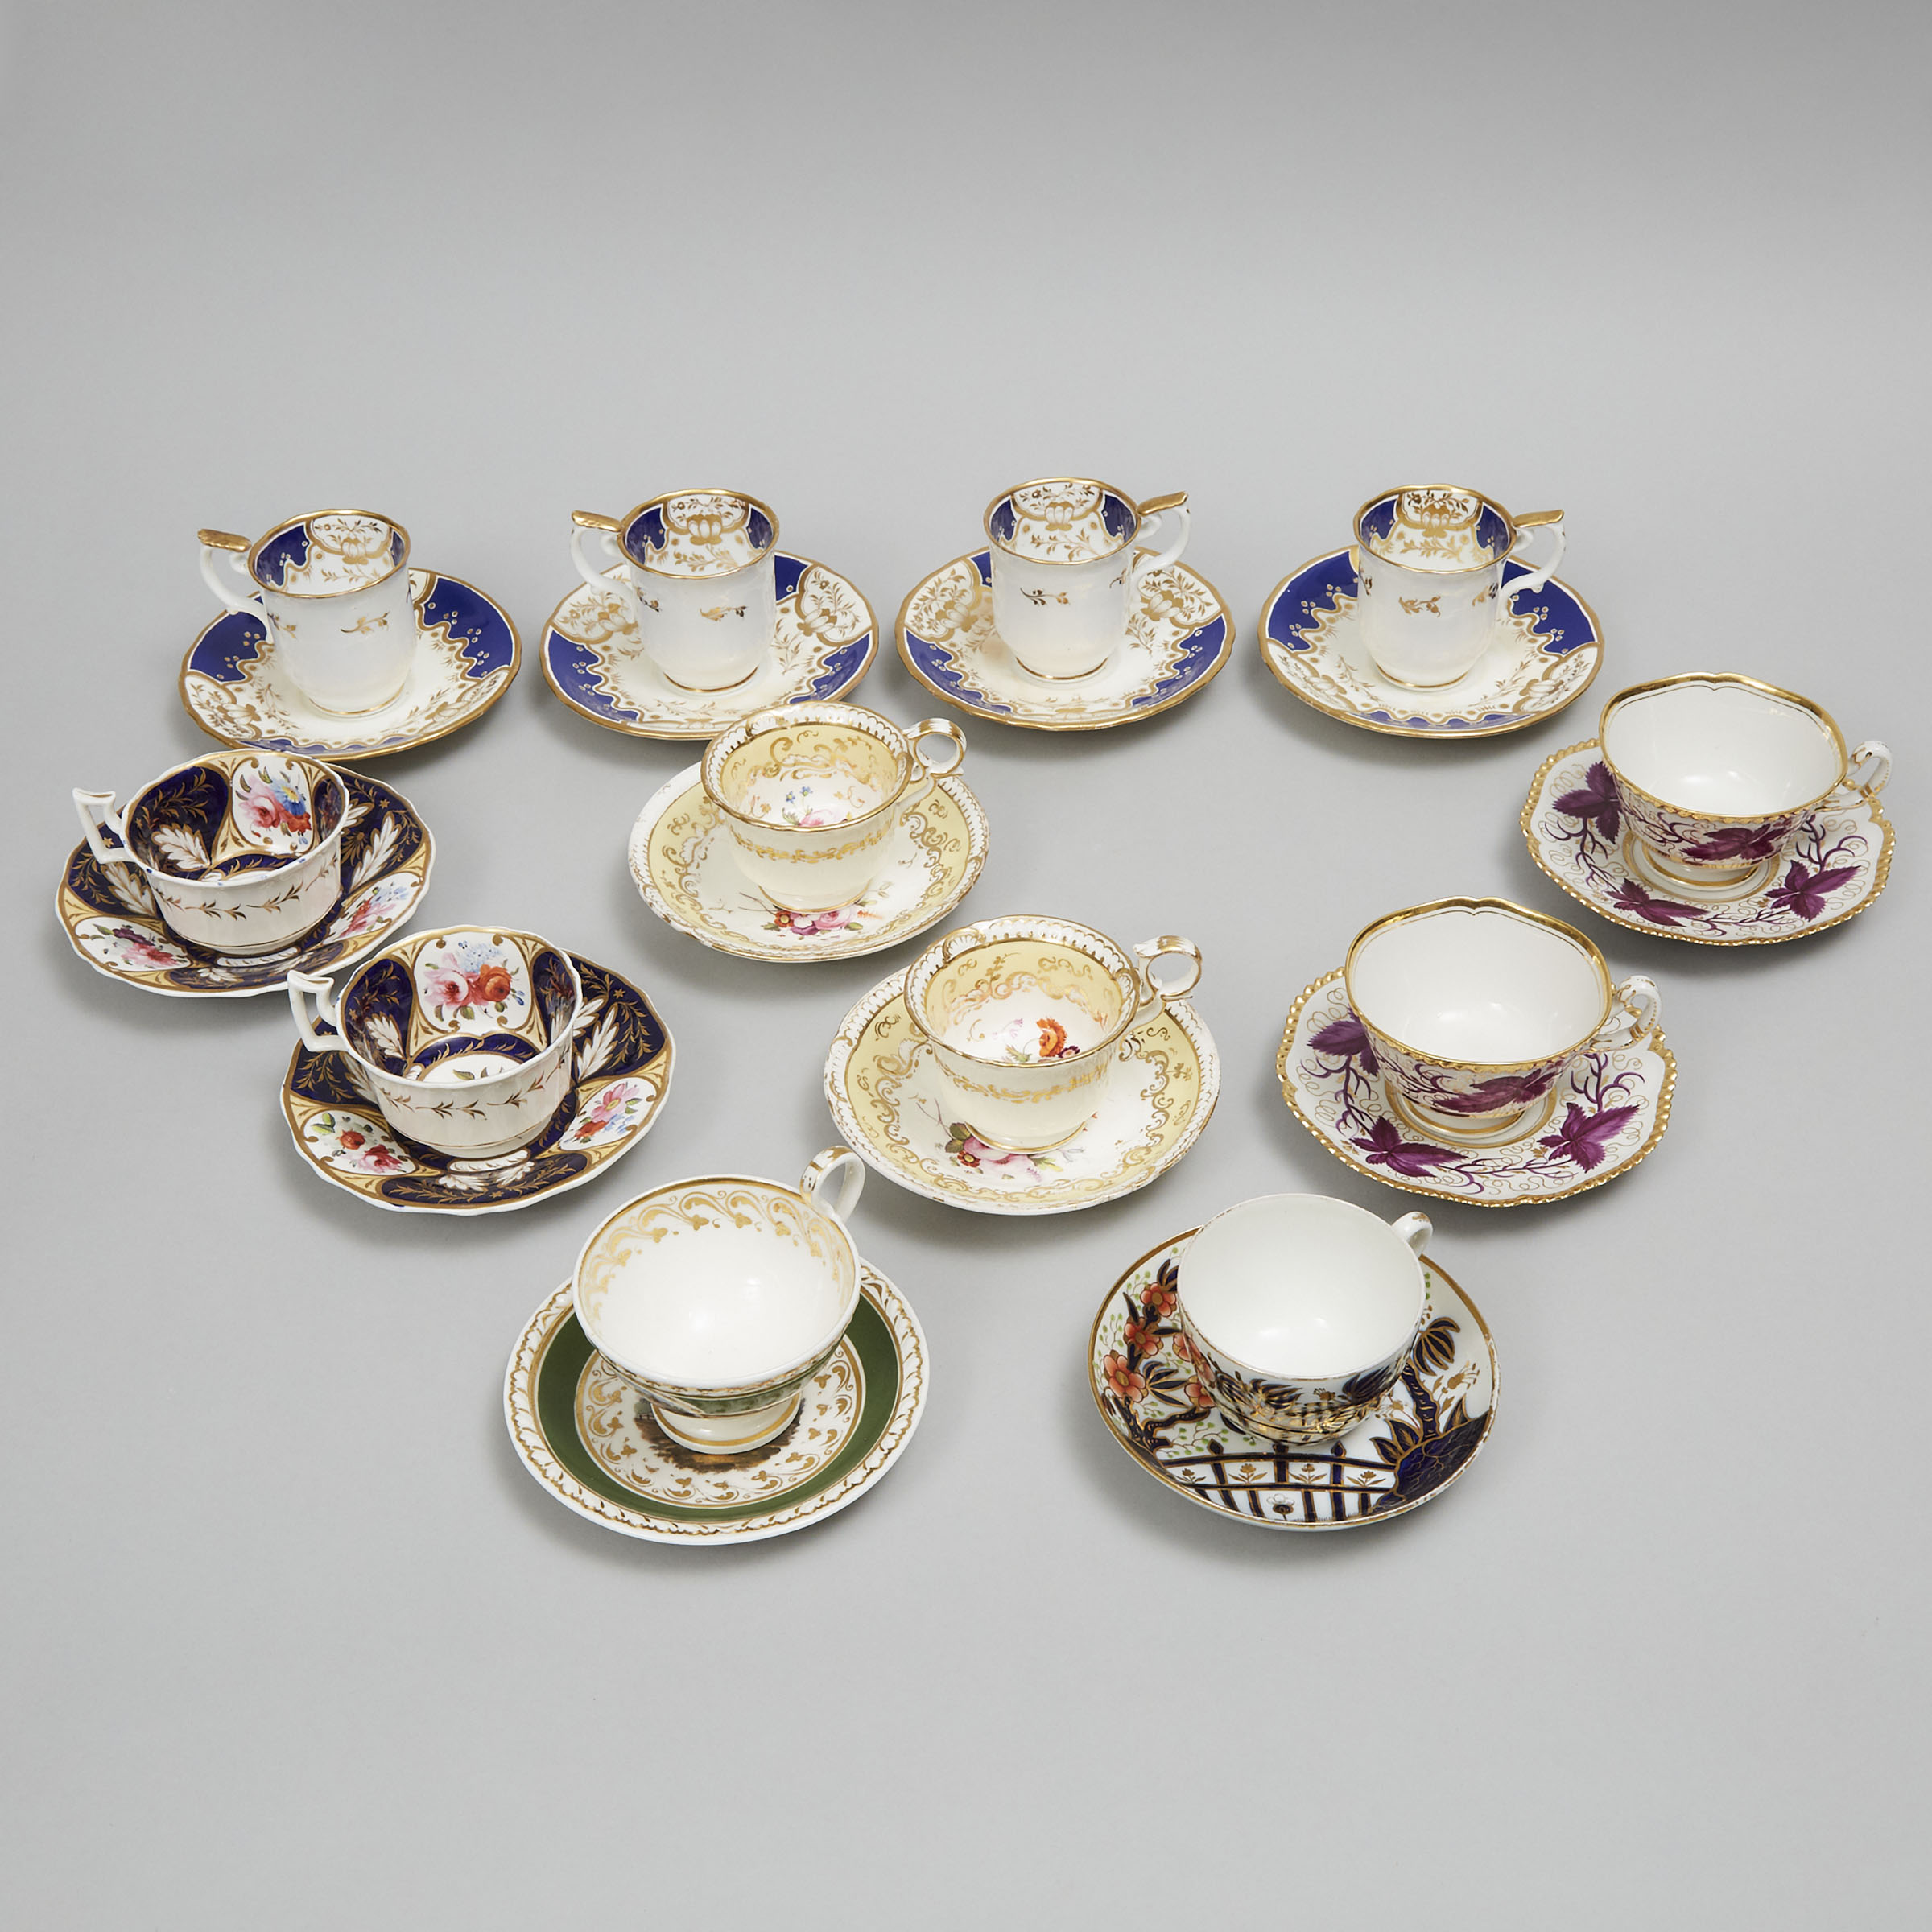 Twelve English Porcelain Cups and Saucers, 19th century